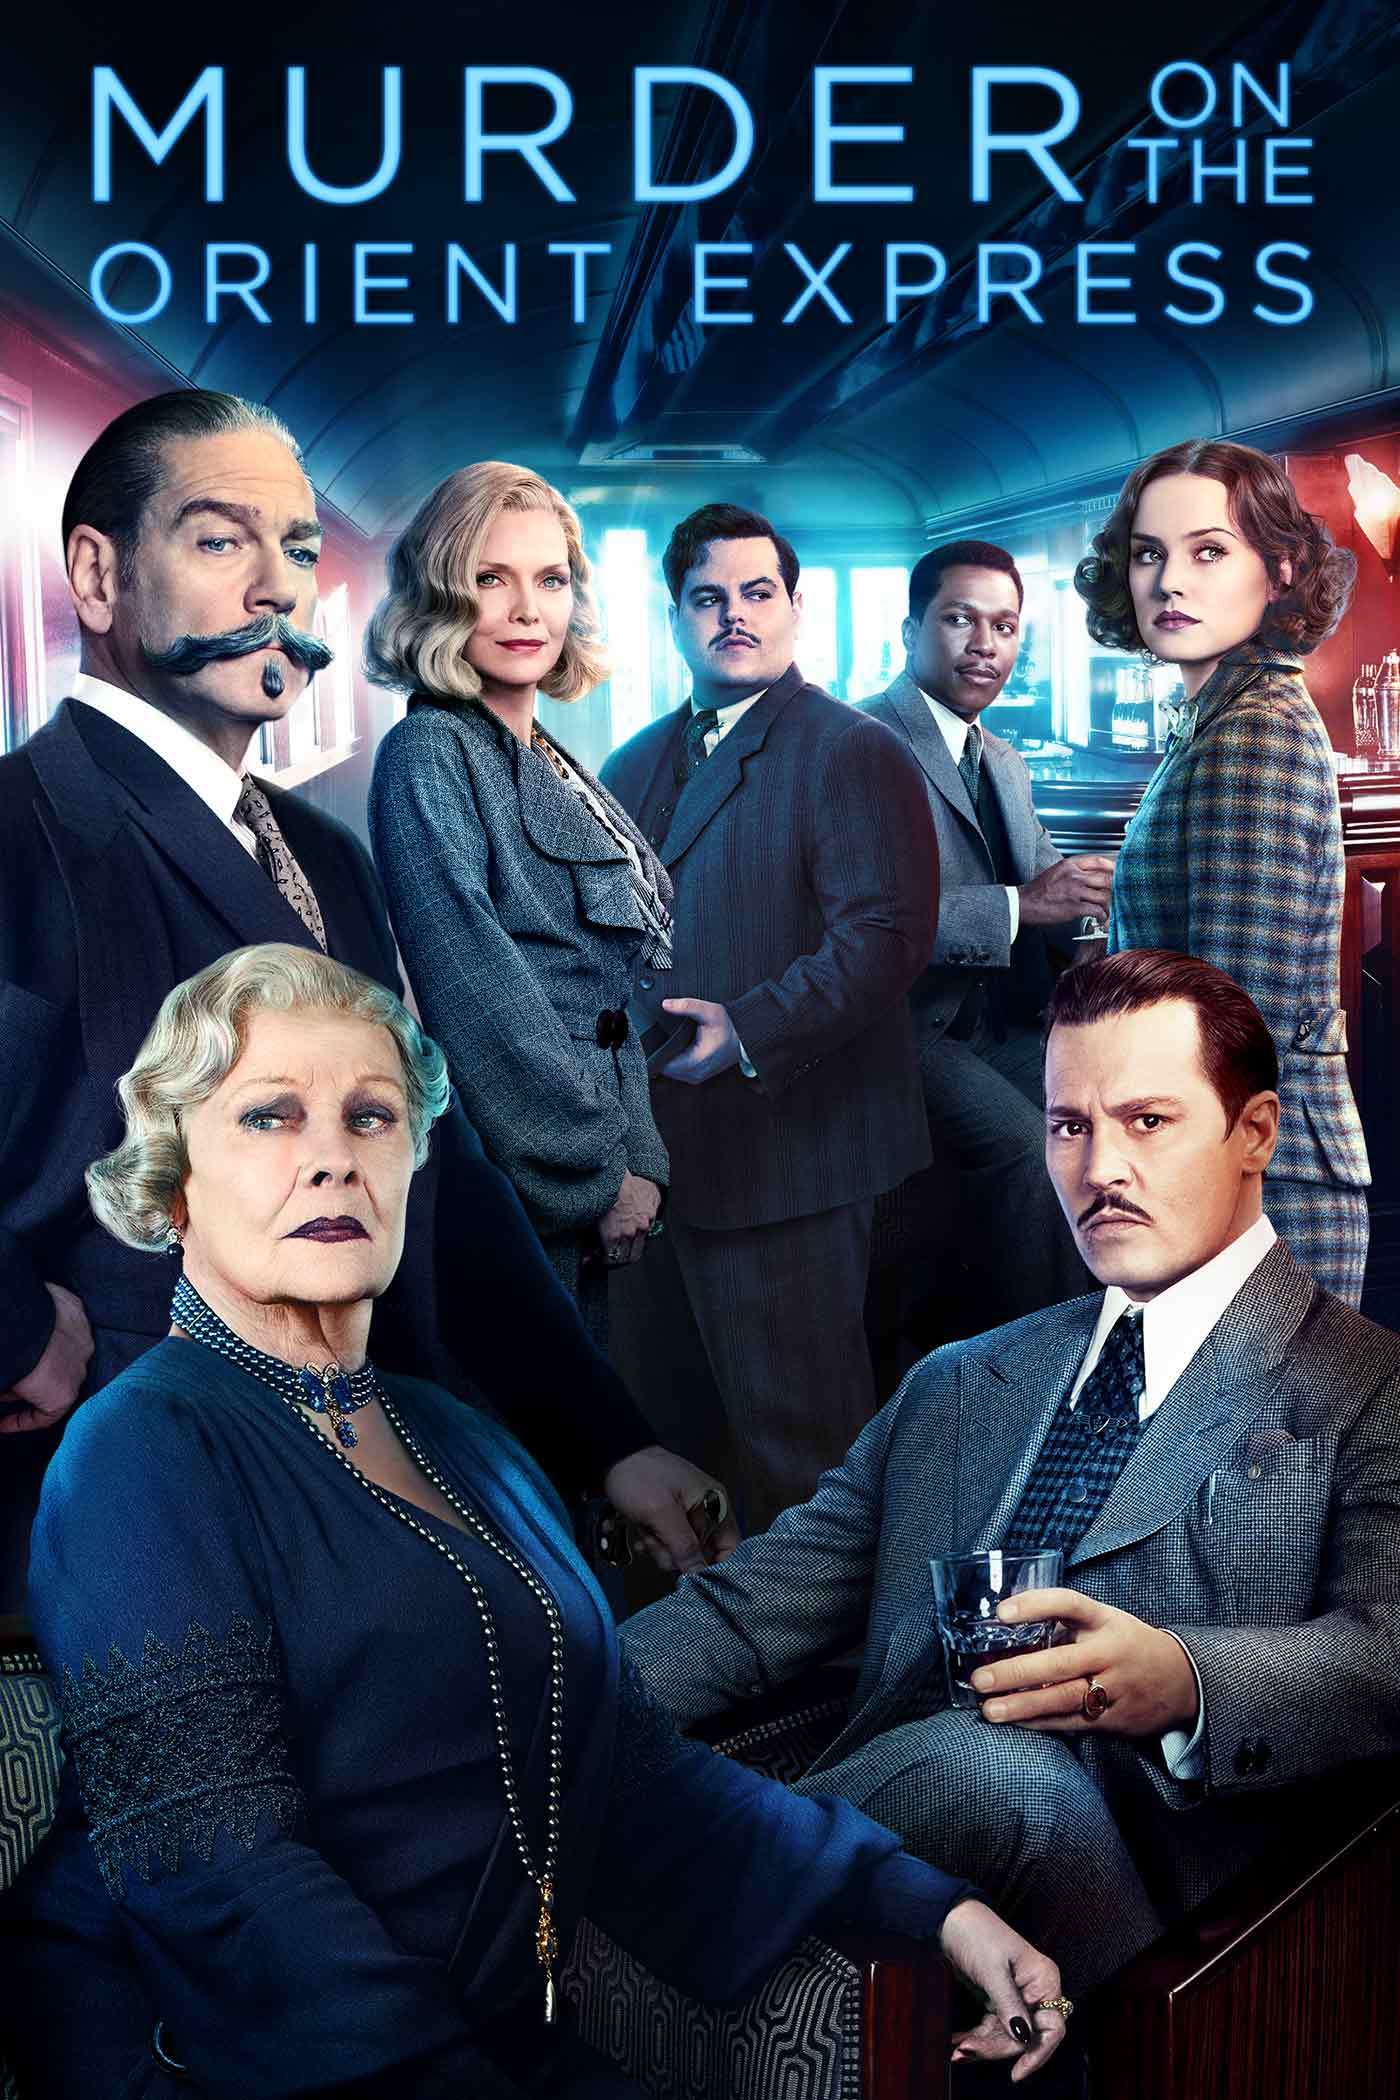 Murder on the Orient Express poster. Credit to it's official website on 20th Century Studios website.